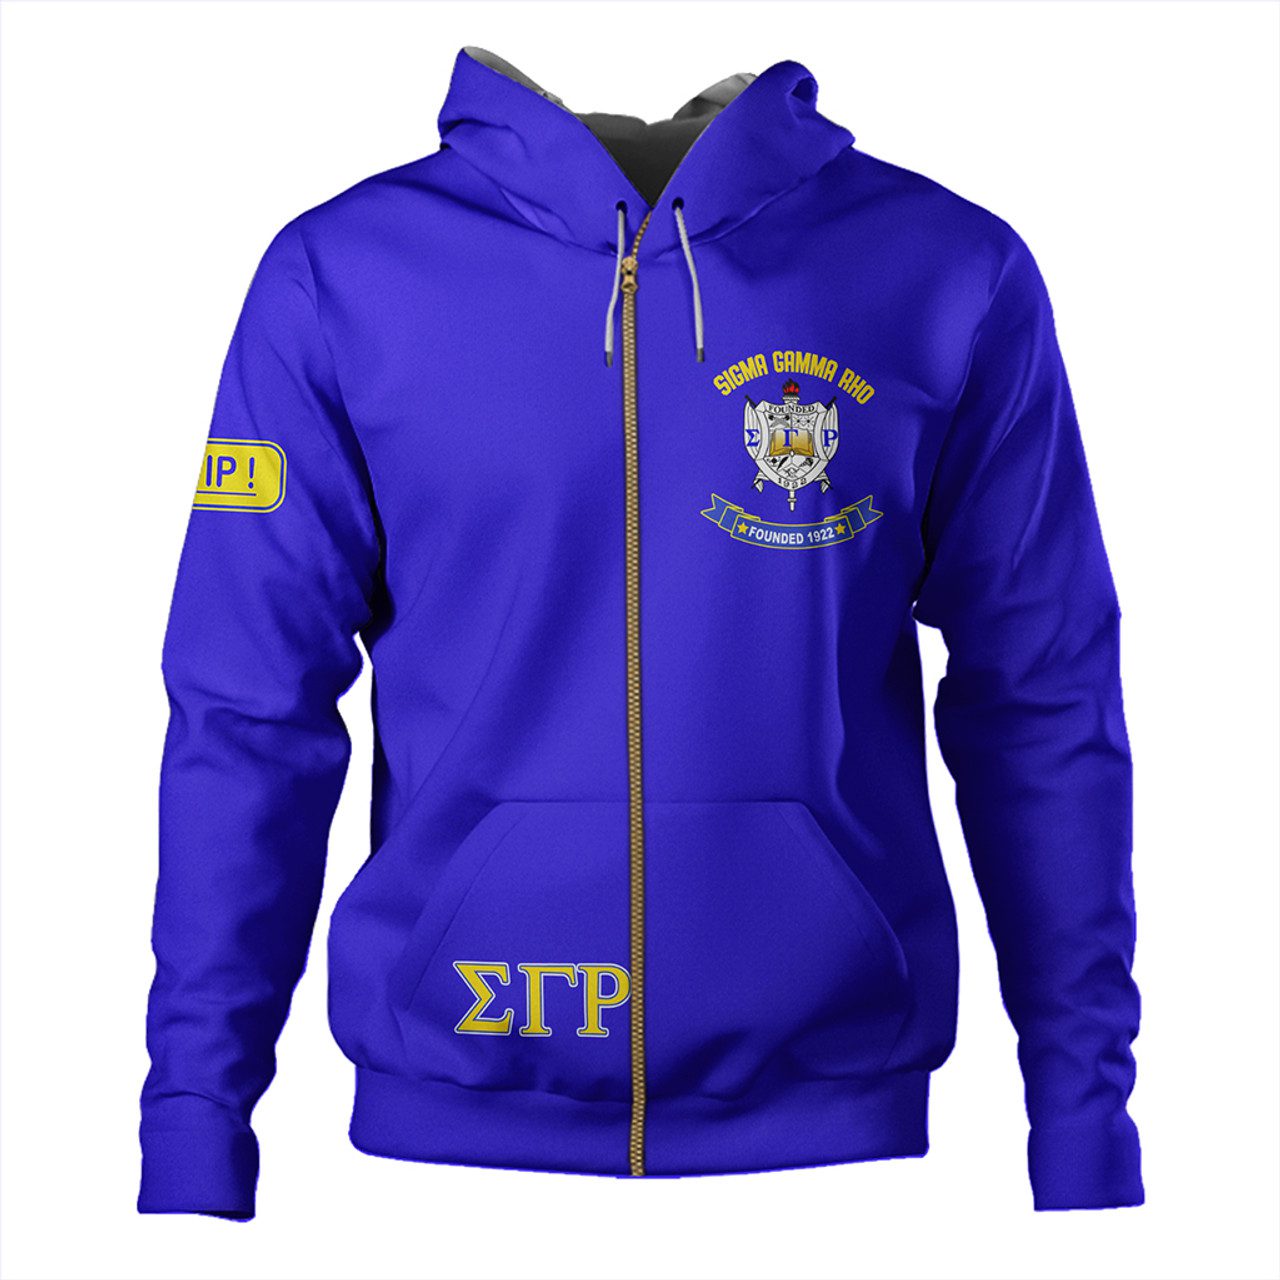 Sigma Gamma Rho Hoodie Greater Service And Greater Progress